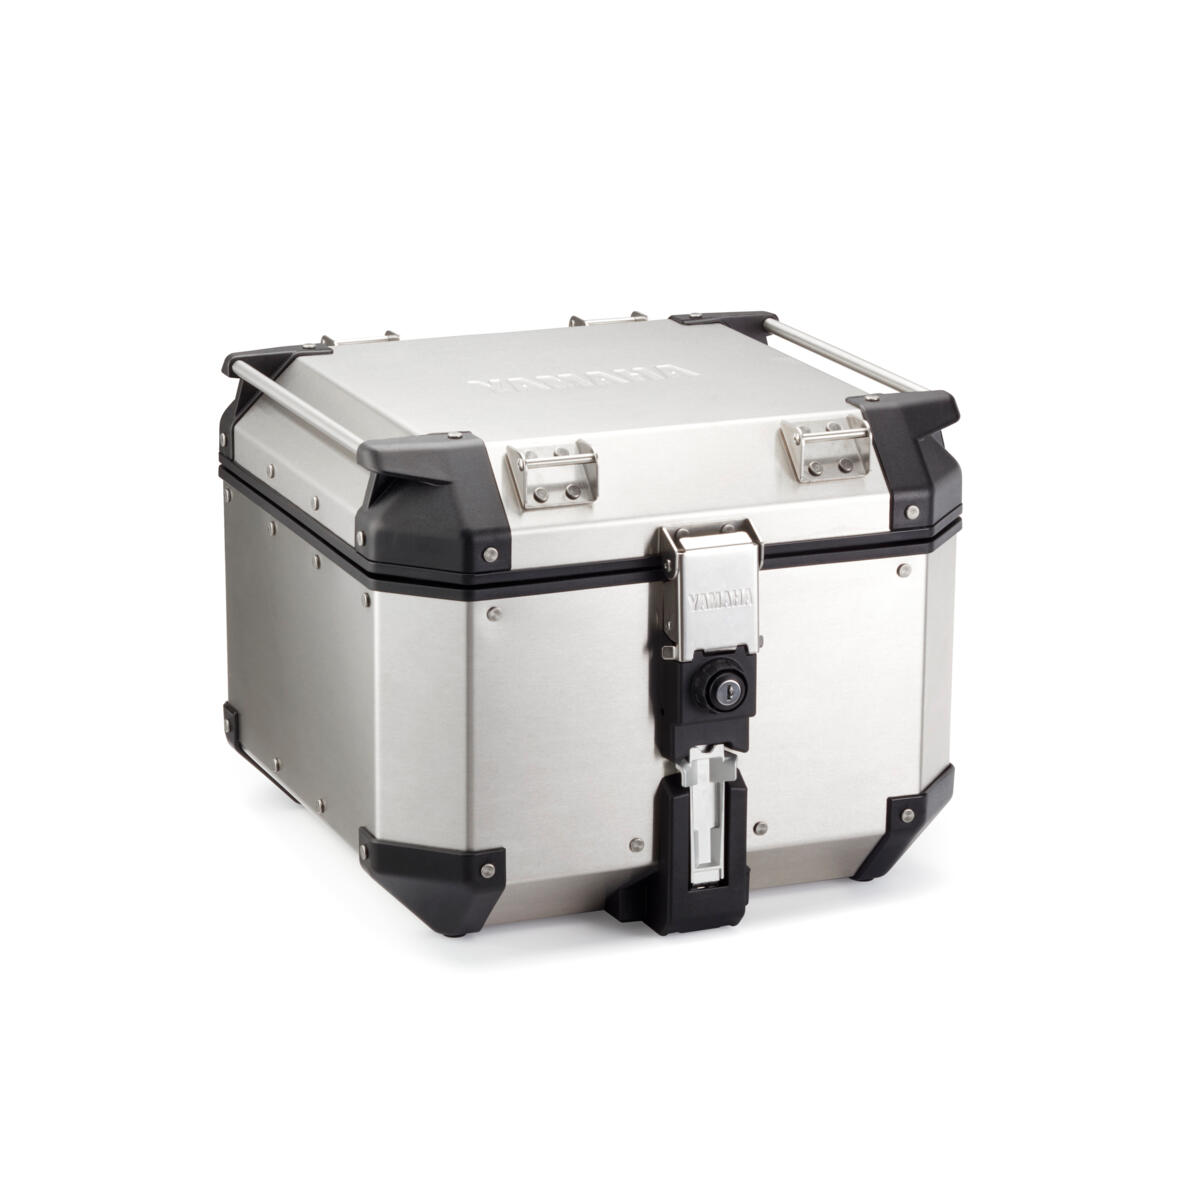 Top case with 42L loading capacity